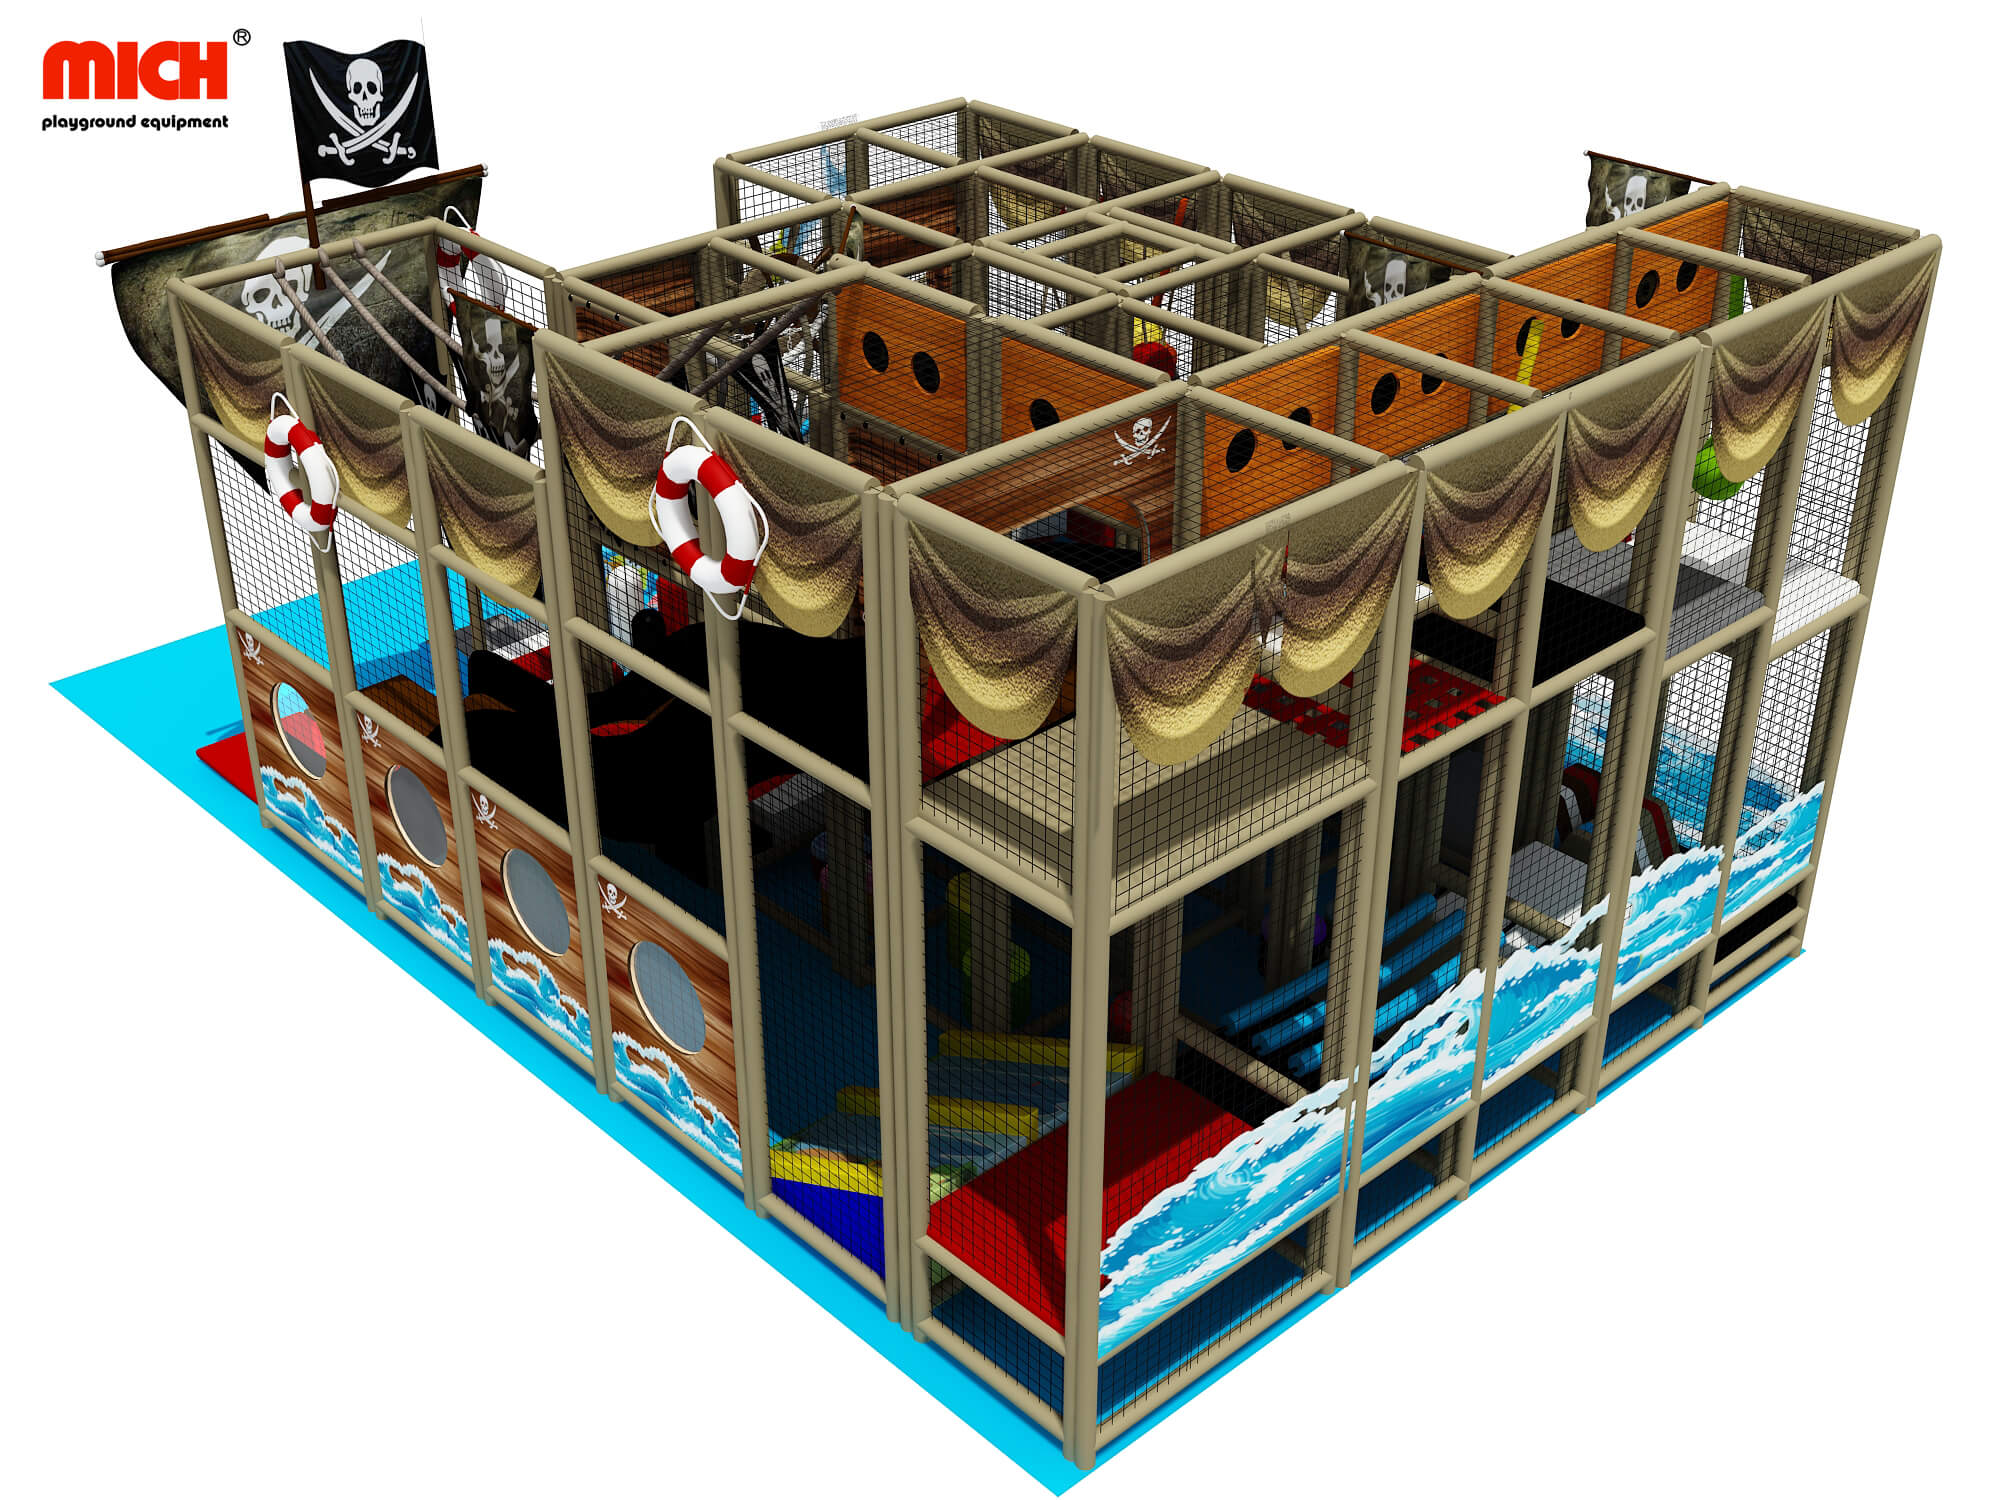 Small Pirate Themed Toddler Soft Playhouse